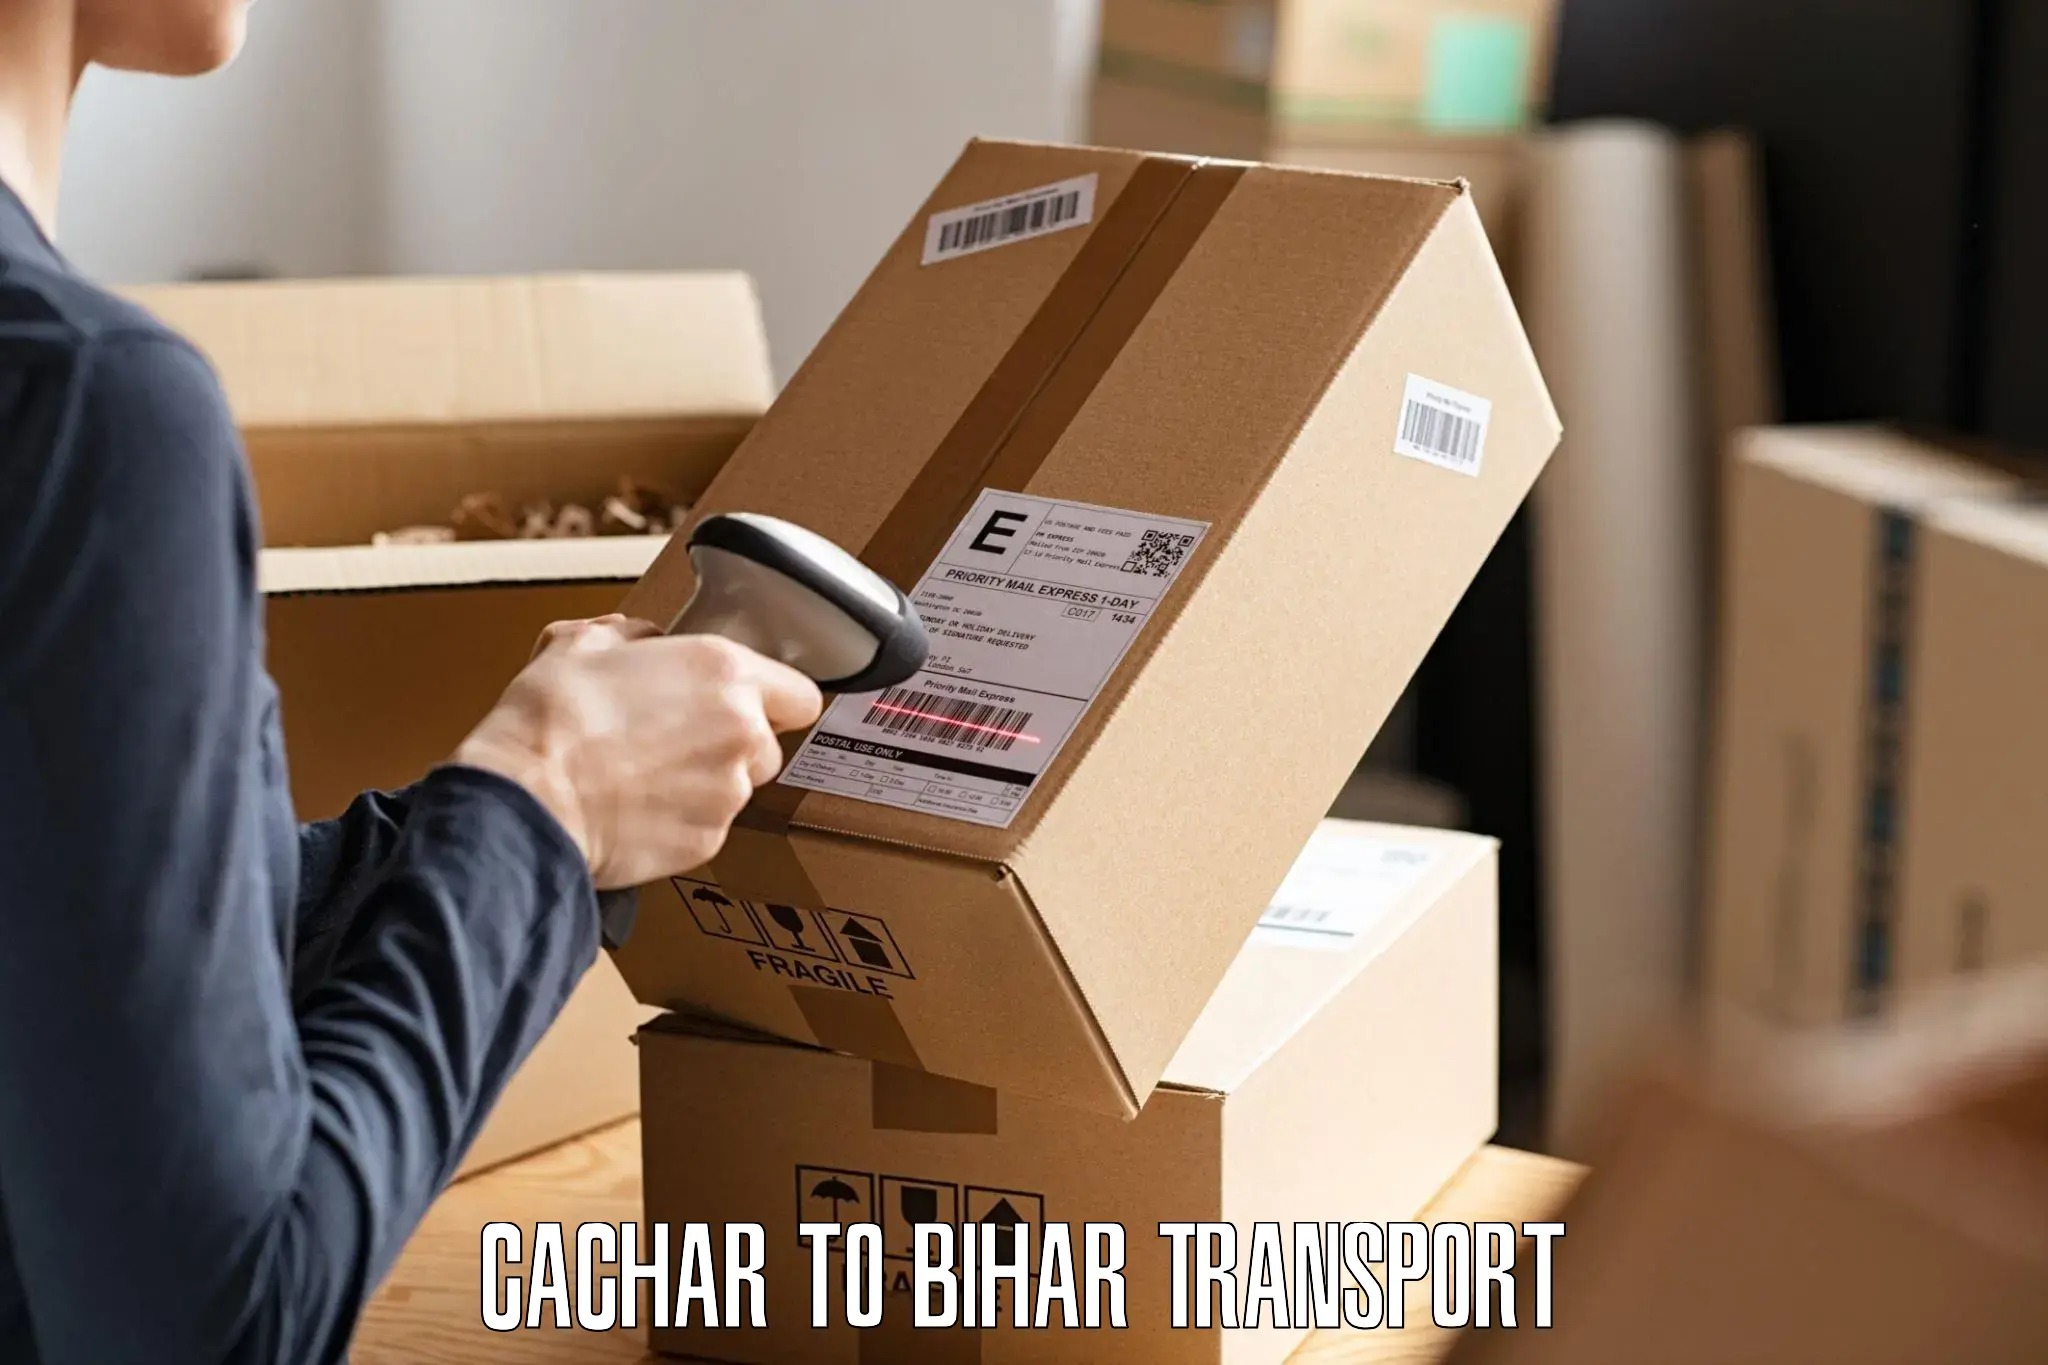 Container transport service Cachar to Sasaram